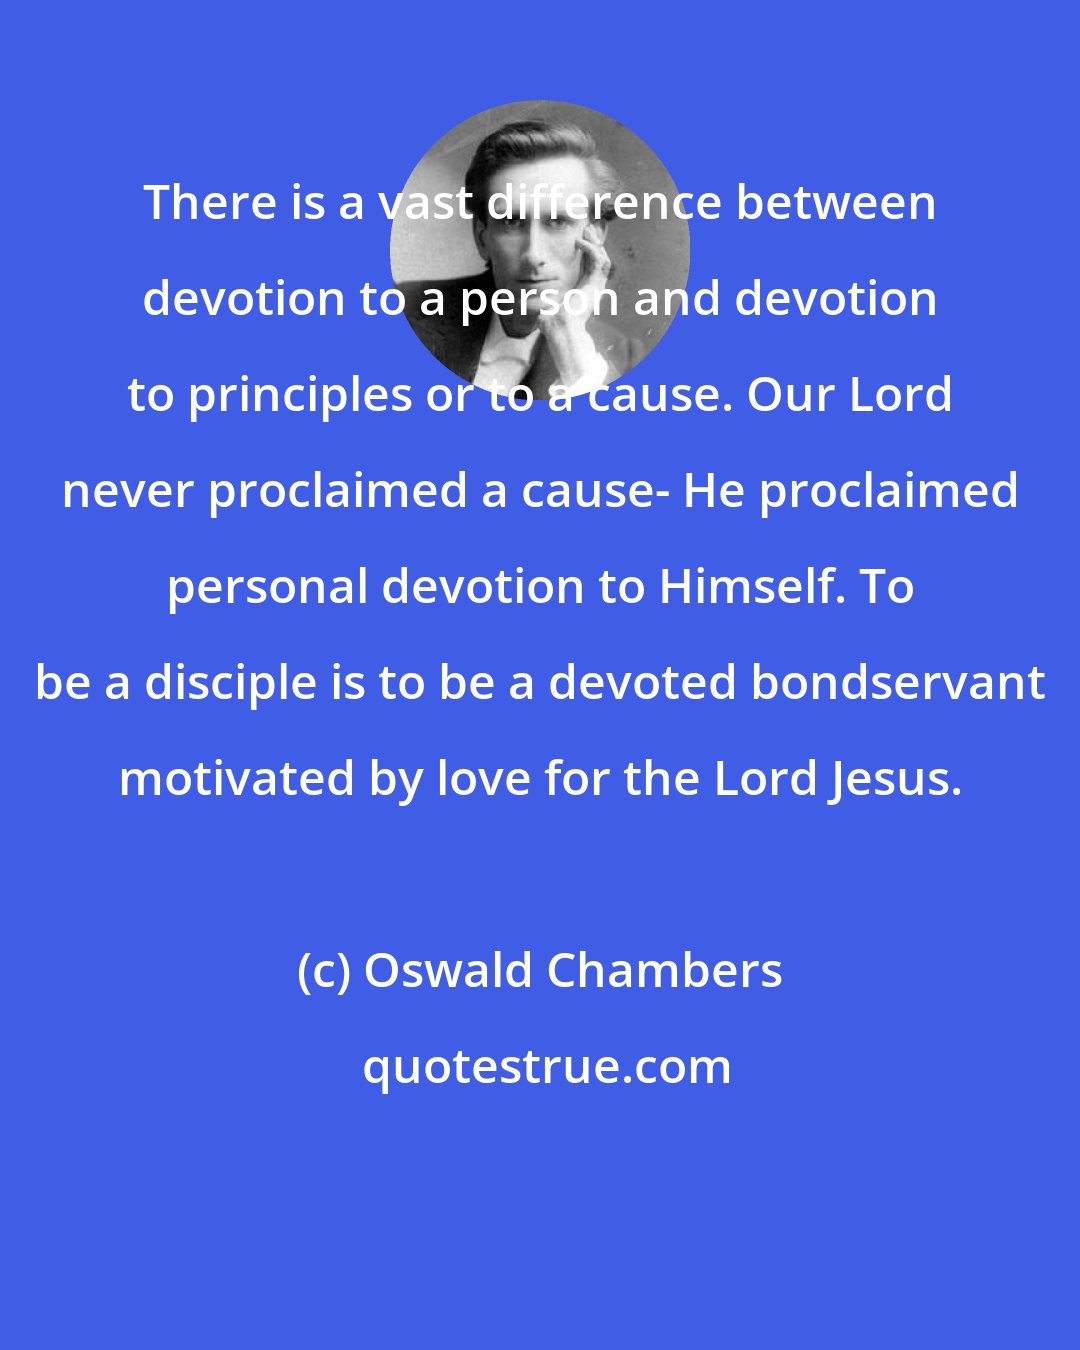 Oswald Chambers: There is a vast difference between devotion to a person and devotion to principles or to a cause. Our Lord never proclaimed a cause- He proclaimed personal devotion to Himself. To be a disciple is to be a devoted bondservant motivated by love for the Lord Jesus.